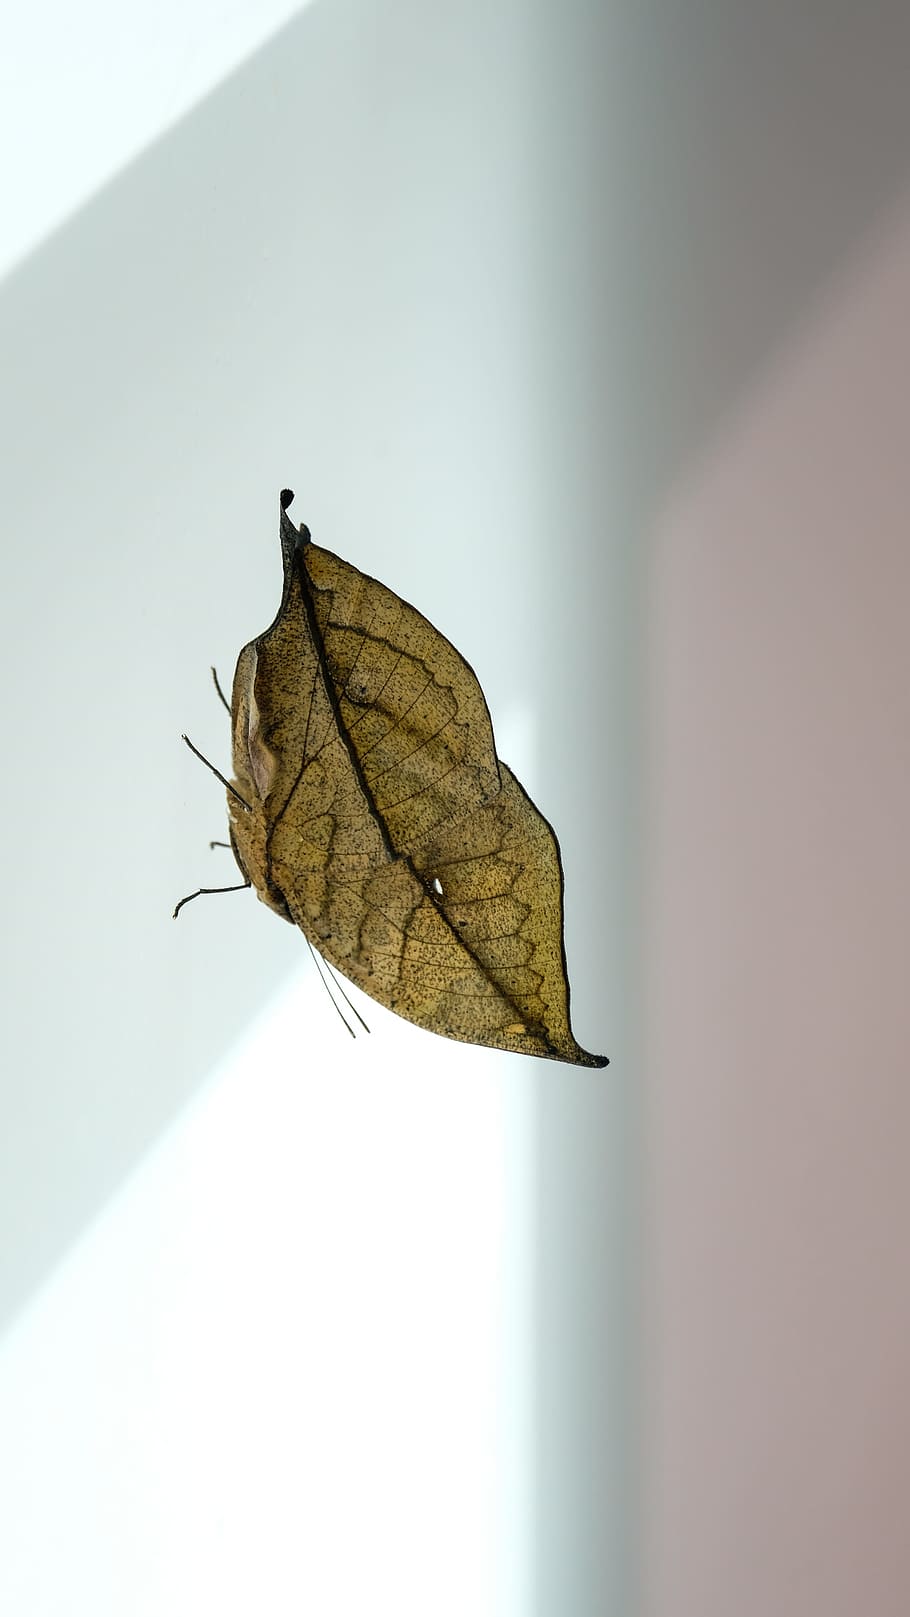 butterfly, indian journal, nature, leaf, plant part, close-up, vulnerability, dry, fragility, autumn